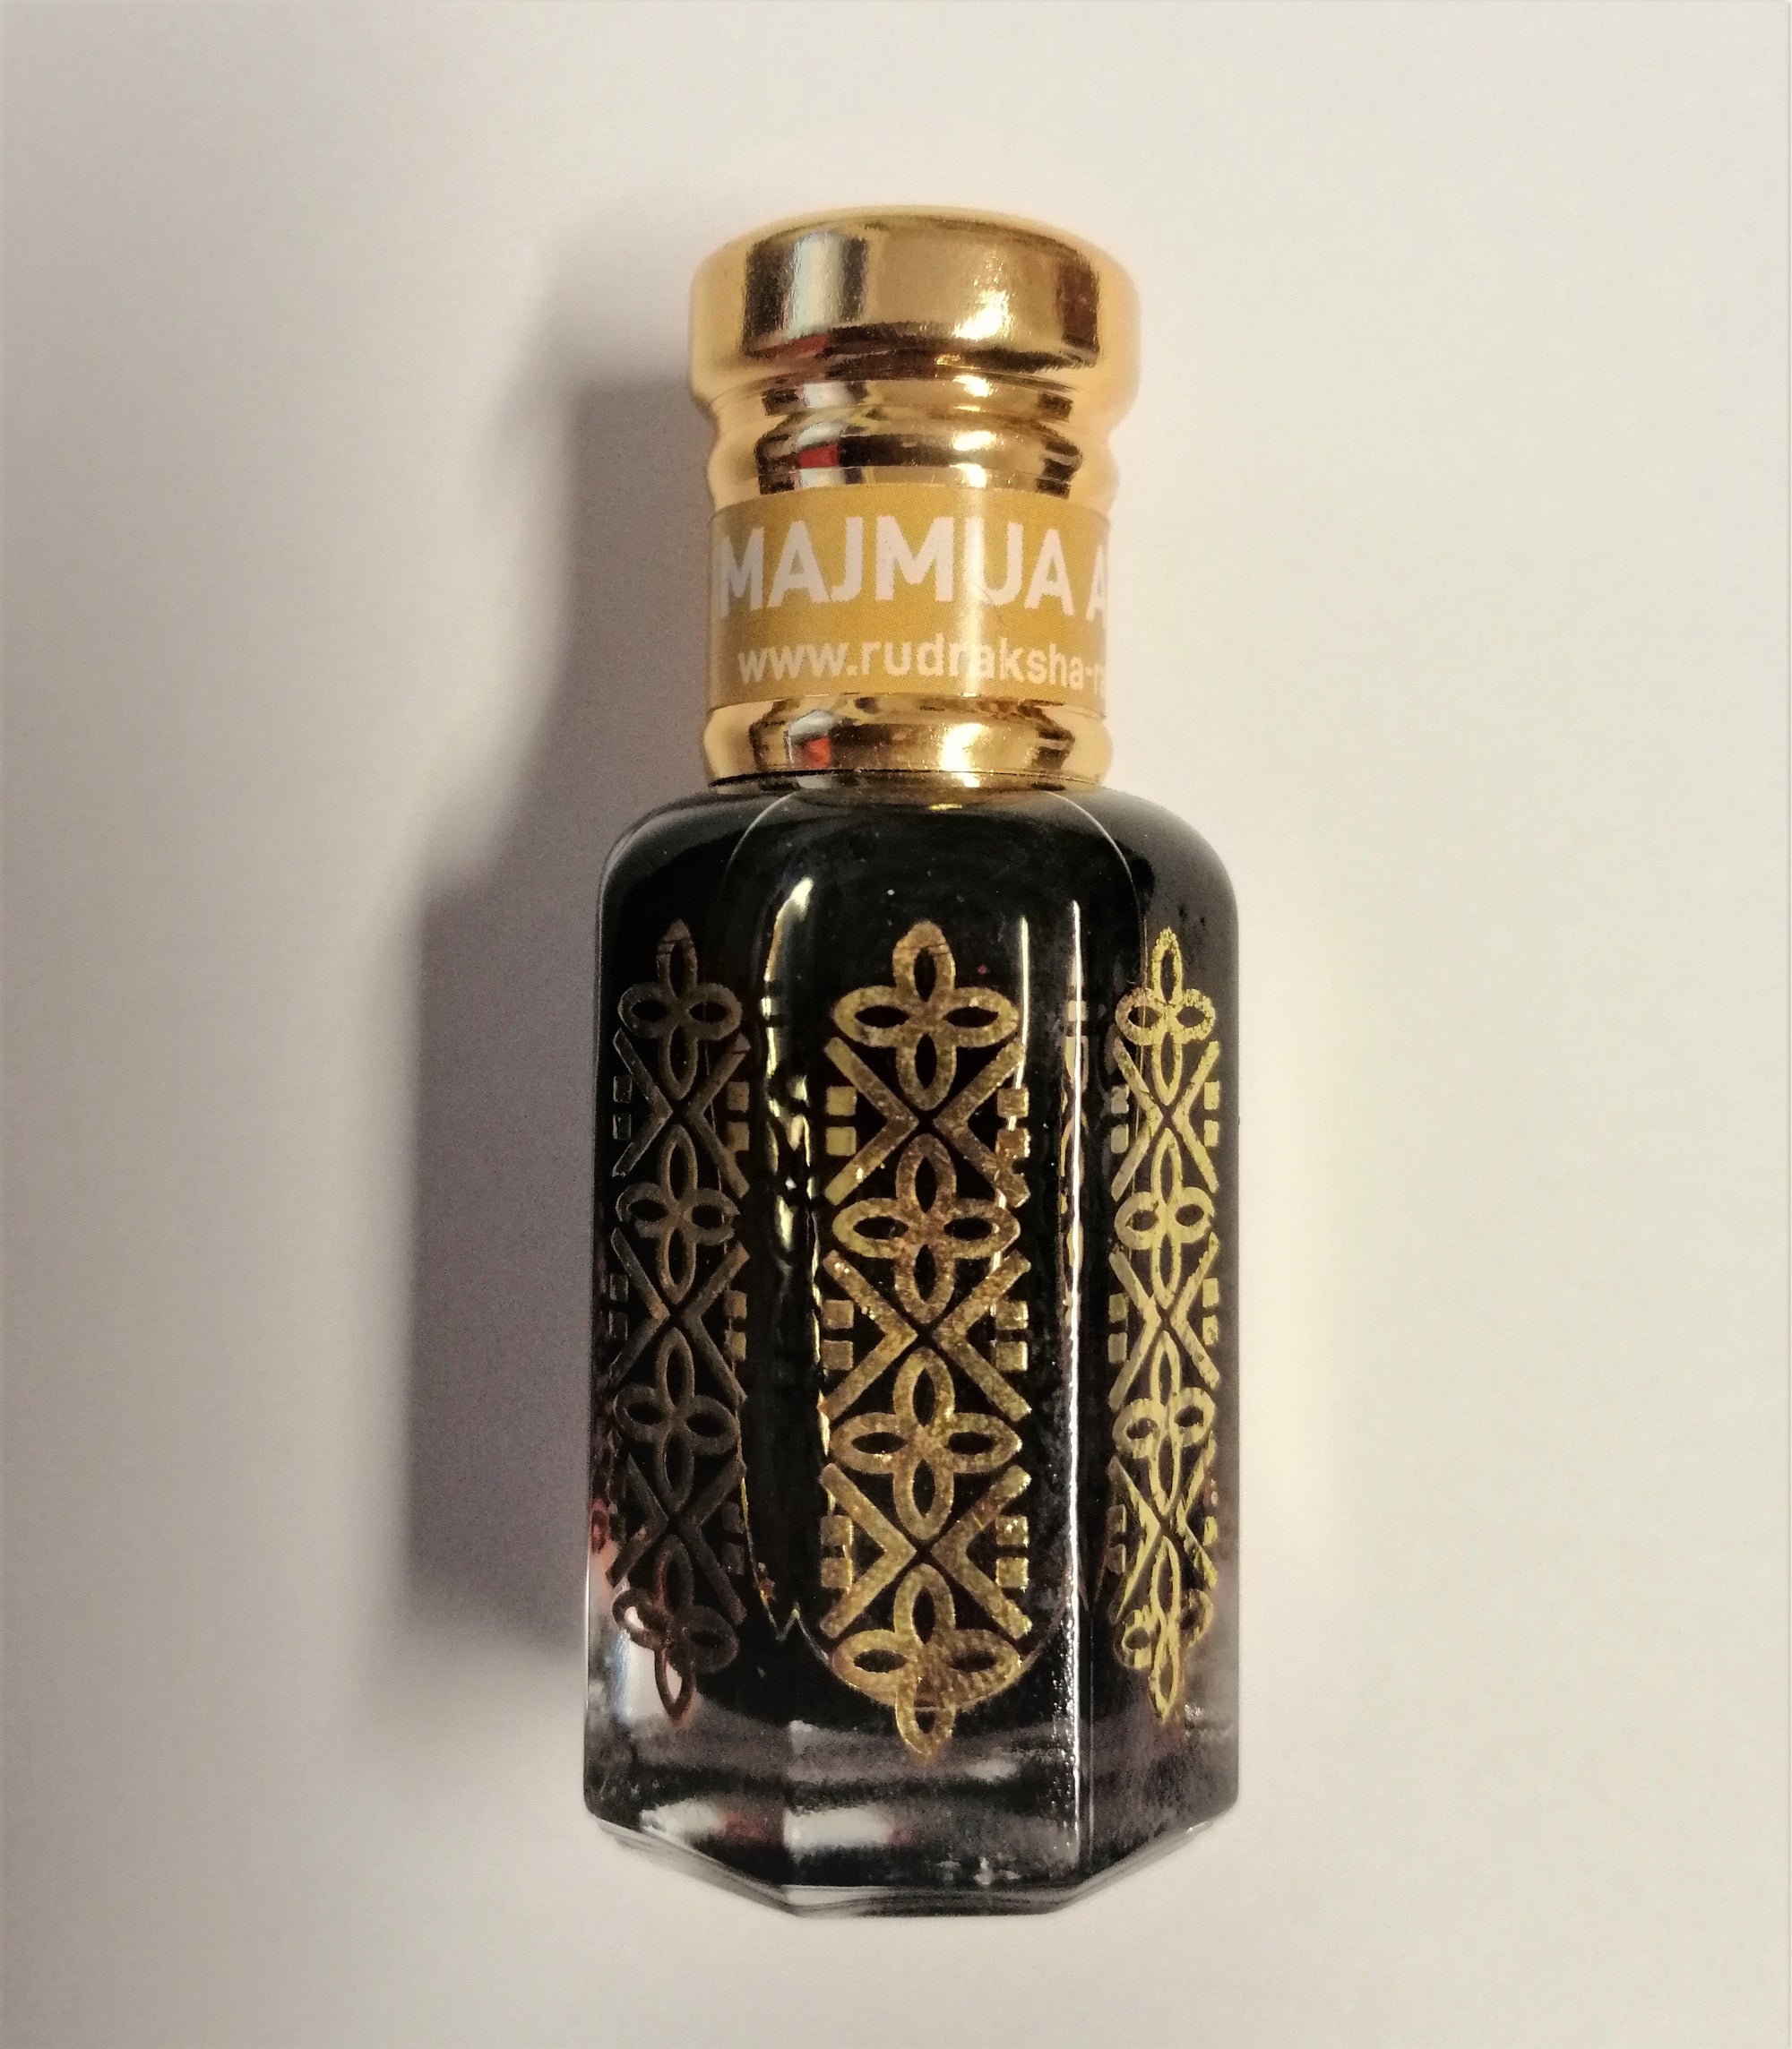 Majmua Attar - special scented oil for aromatherapy and ceremony